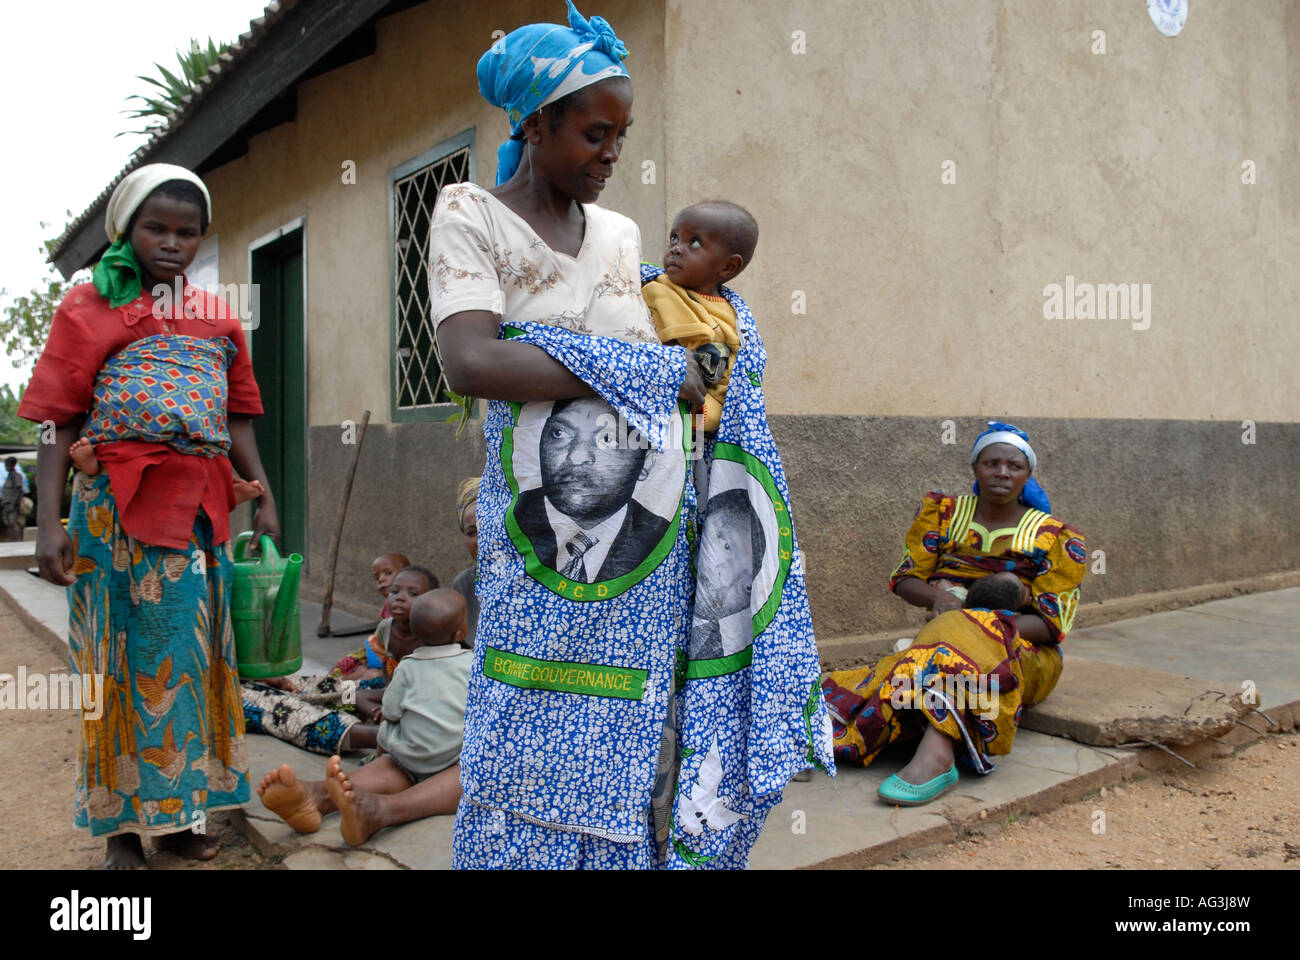 A woman carries a baby with a dress bearing the figure of the Congolese President Joseph Kabila Kabange, in North Kivu province, DR Congo Africa Stock Photo